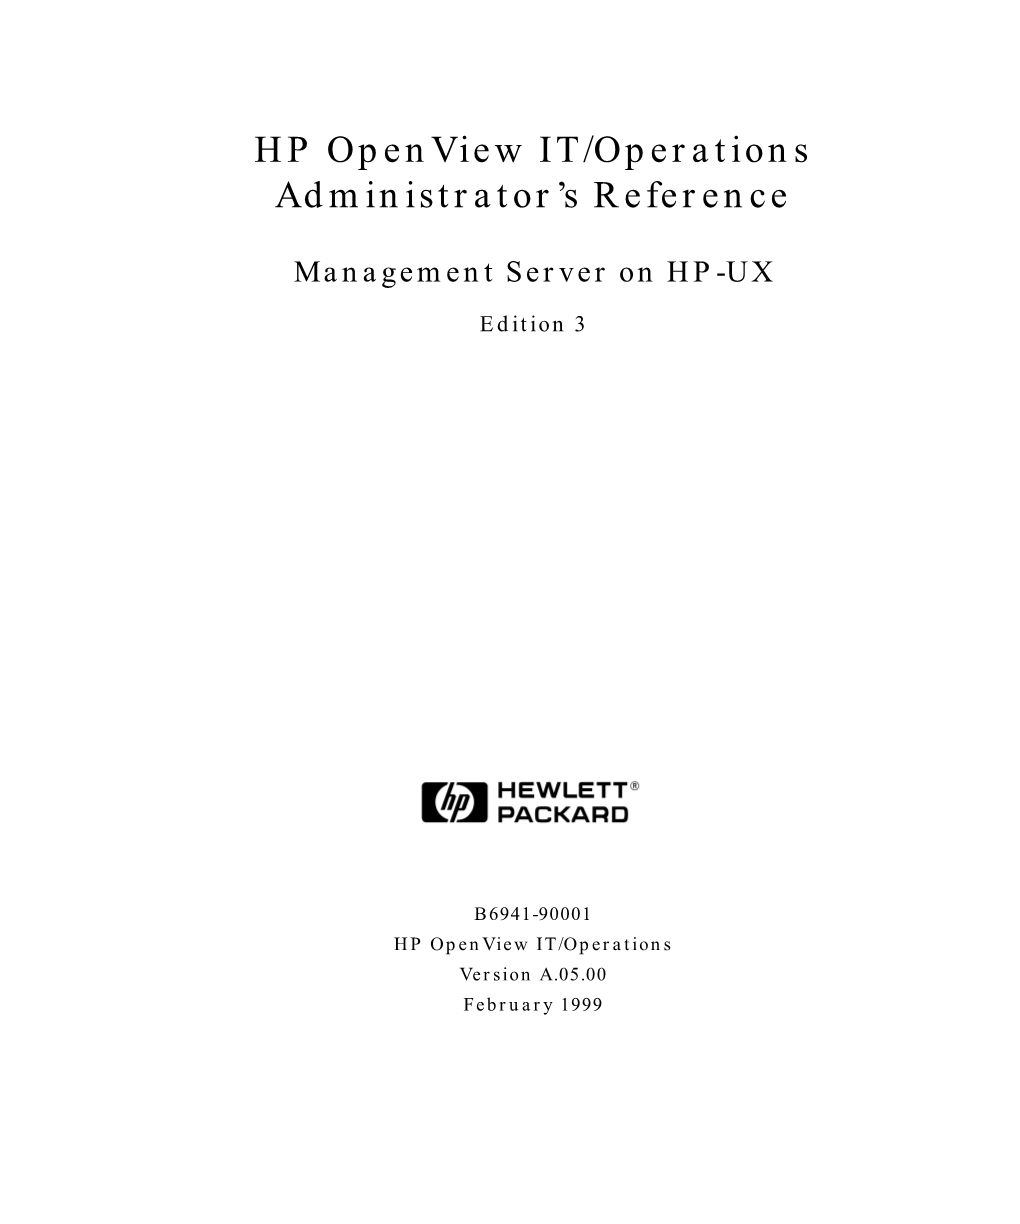 HP Openview IT/Operations Administrator's Reference